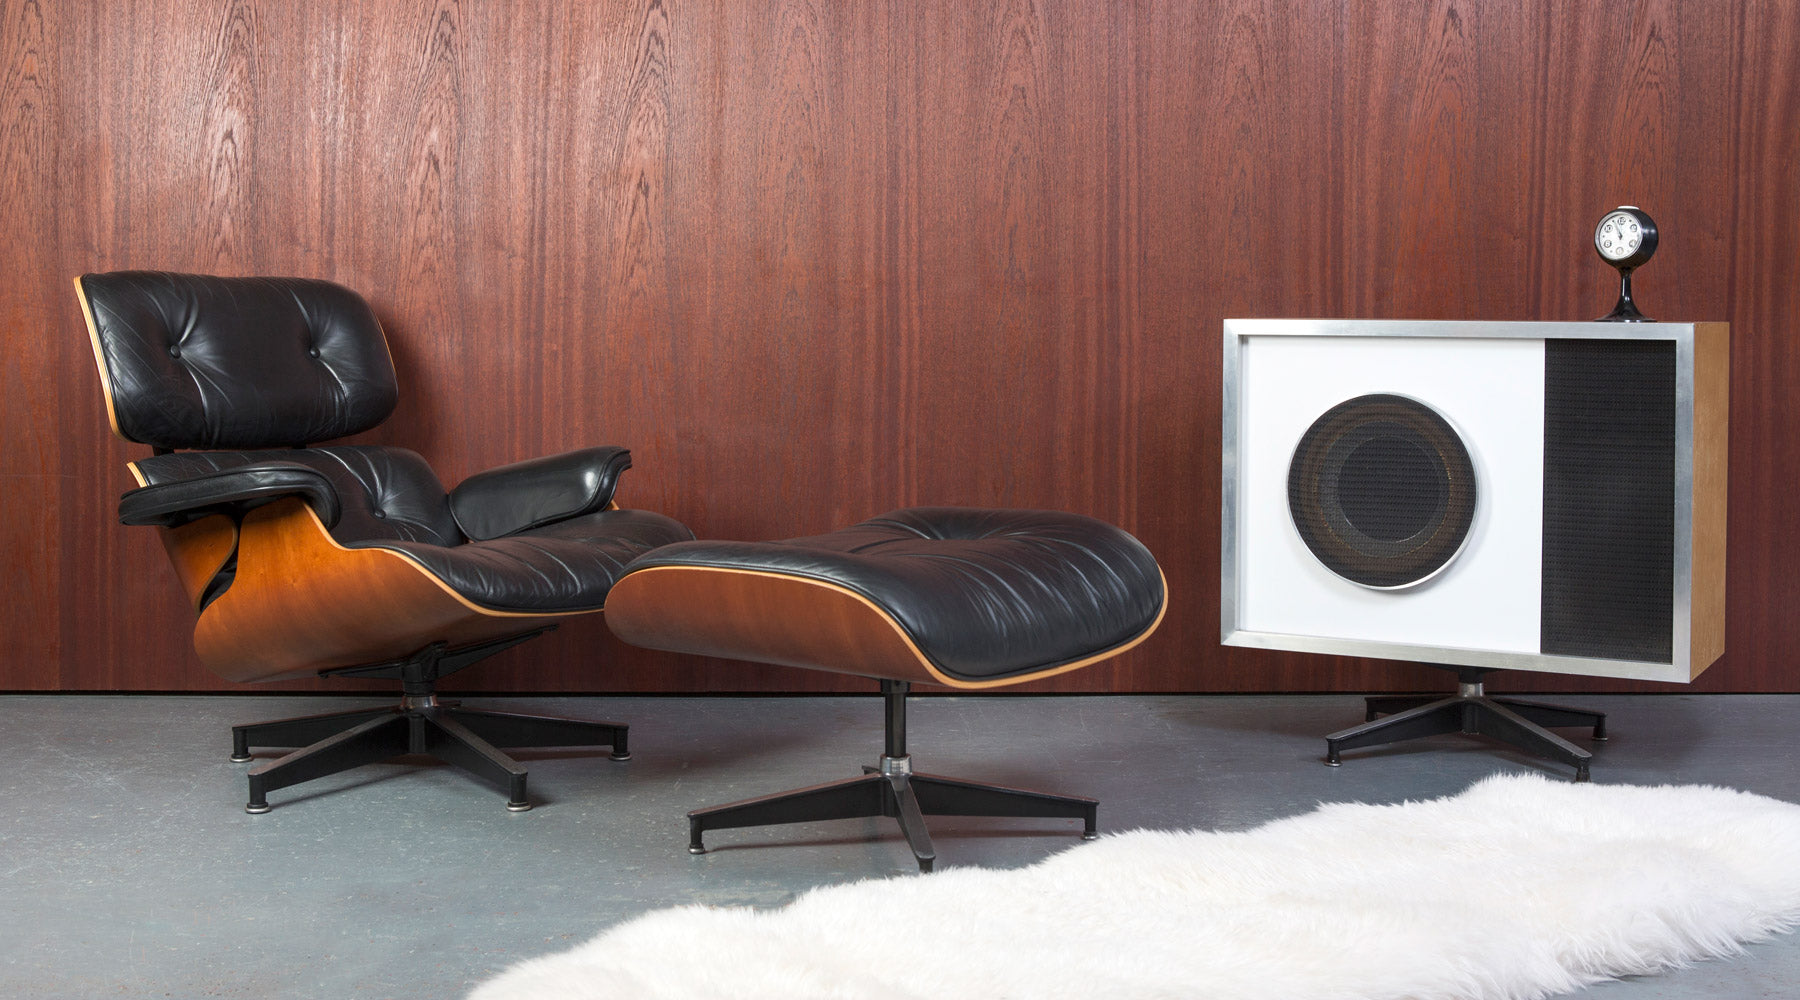 A gorgeous and original Eames Lounge Chair & Ottoman sit with a Trusonic Speaker against a wood paneled background